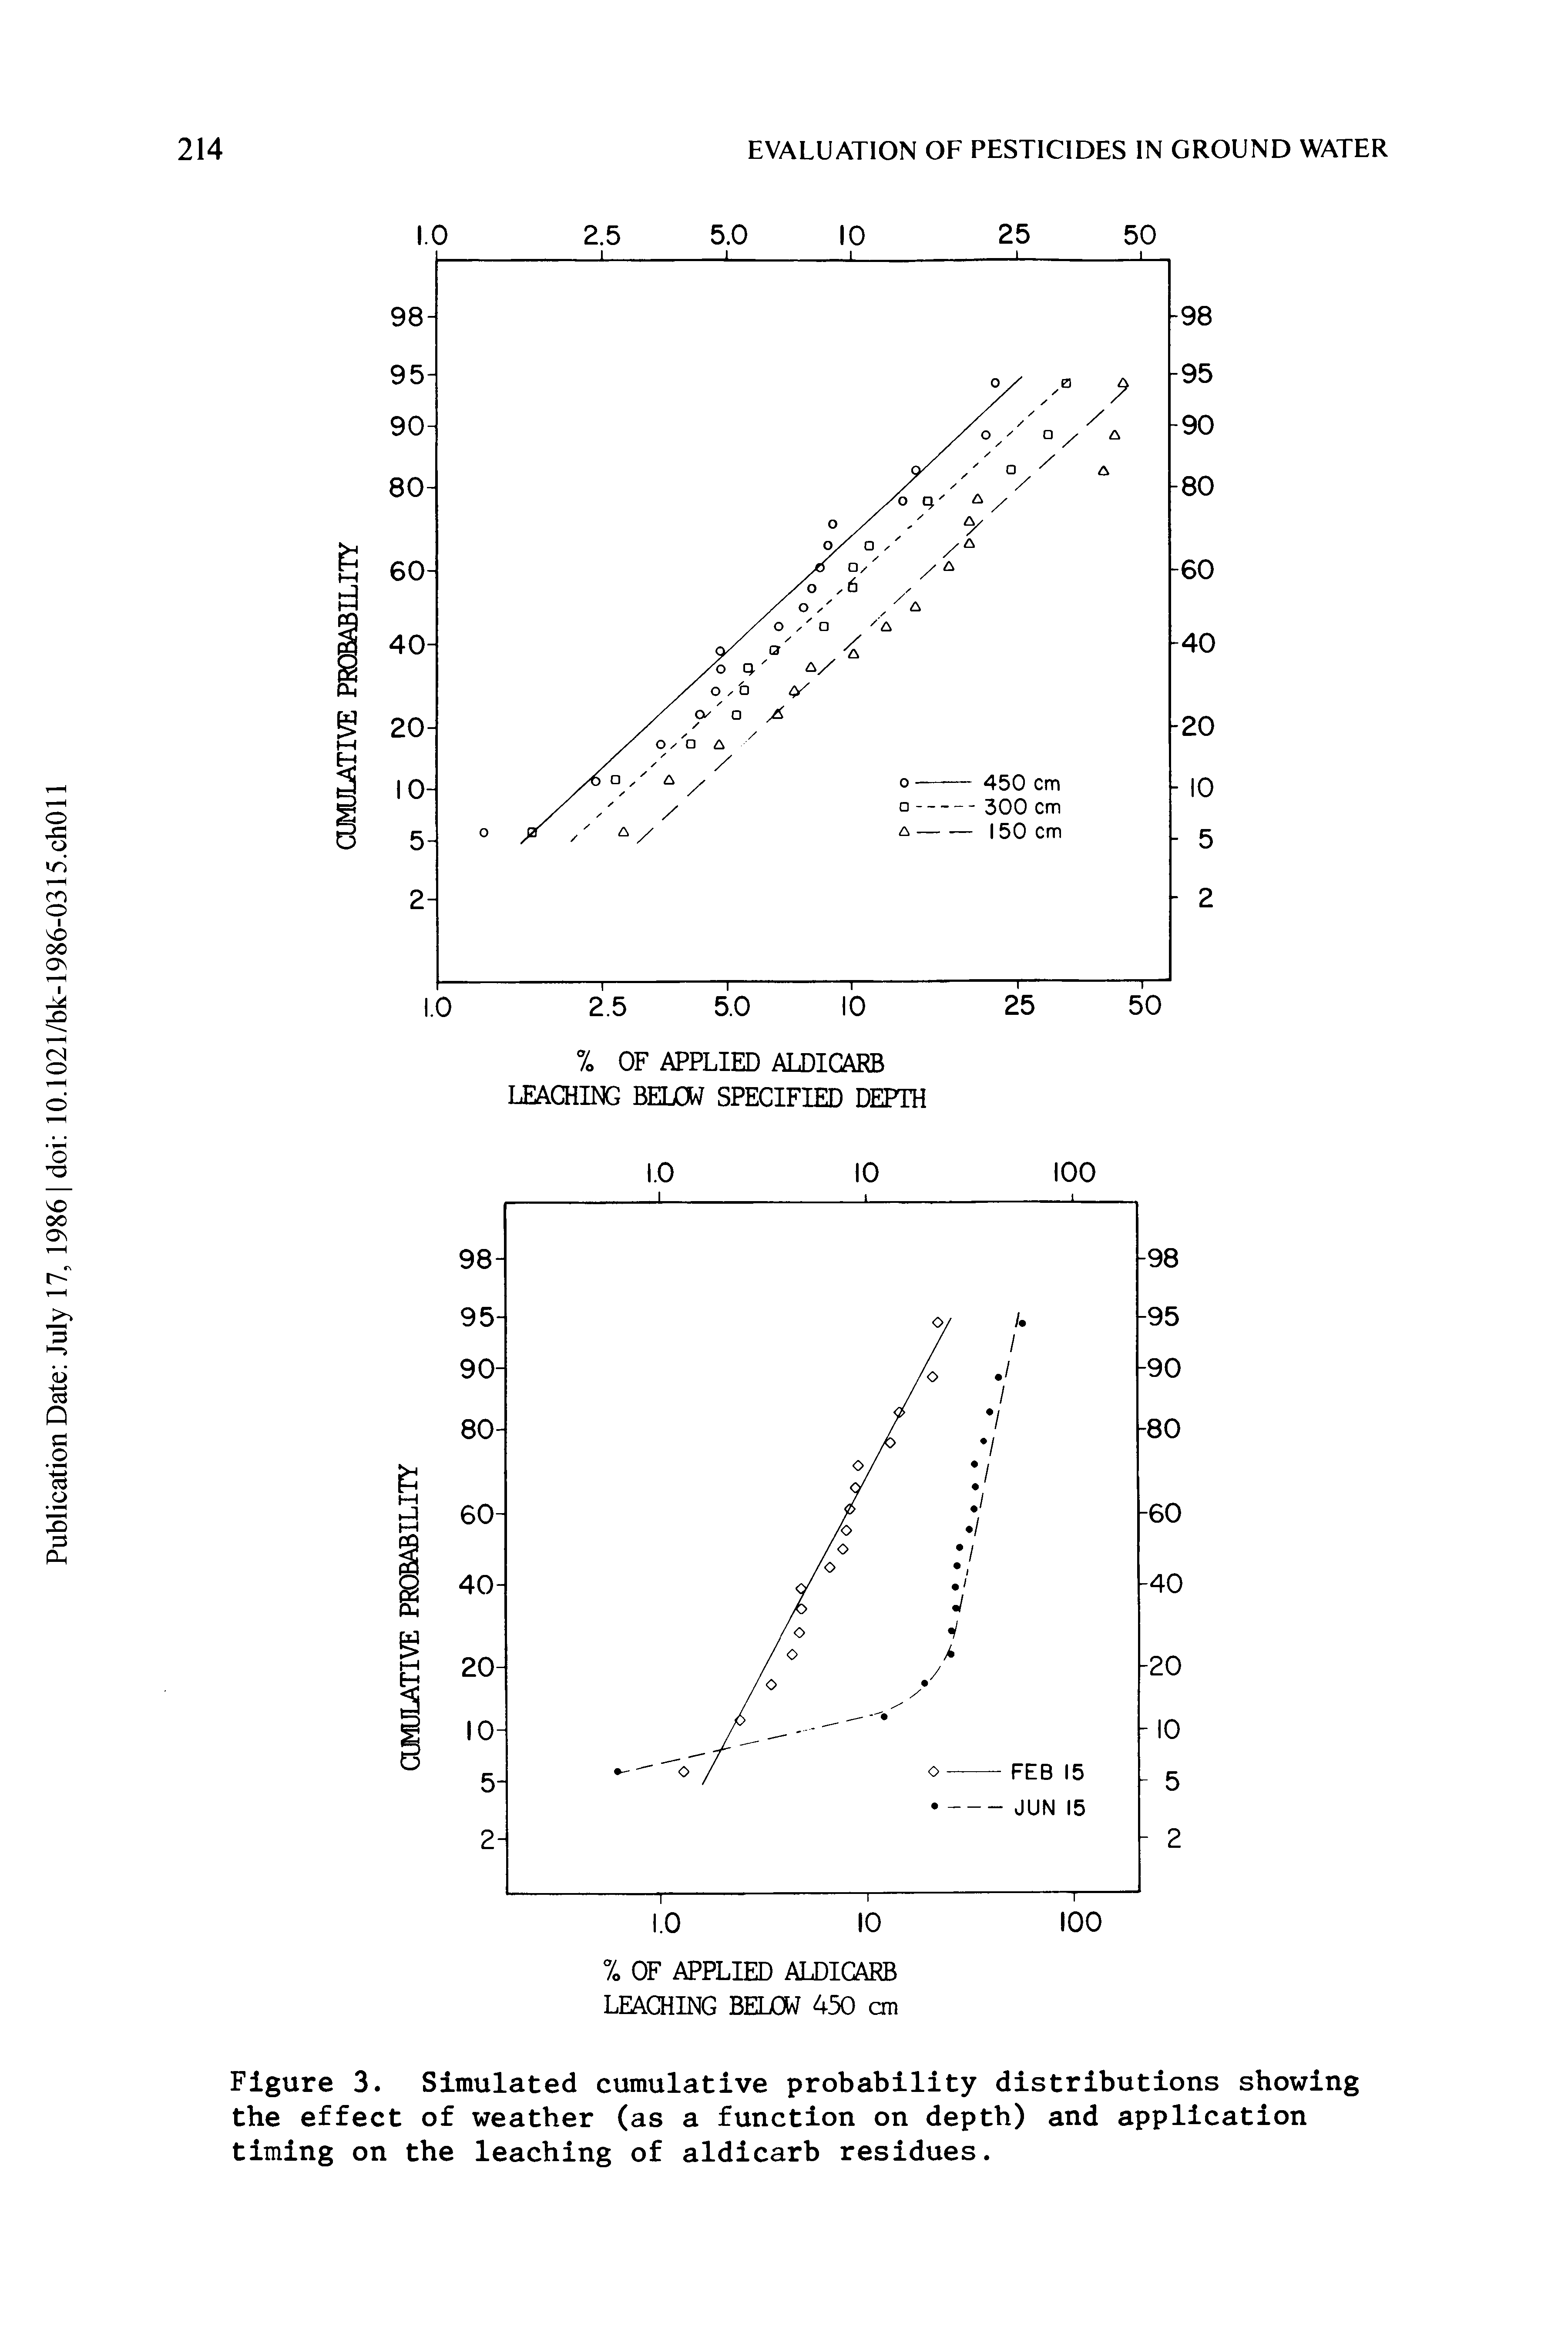 Figure 3. Simulated cumulative probability distributions showing the effect of weather (as a function on depth) and application timing on the leaching of aldicarb residues.